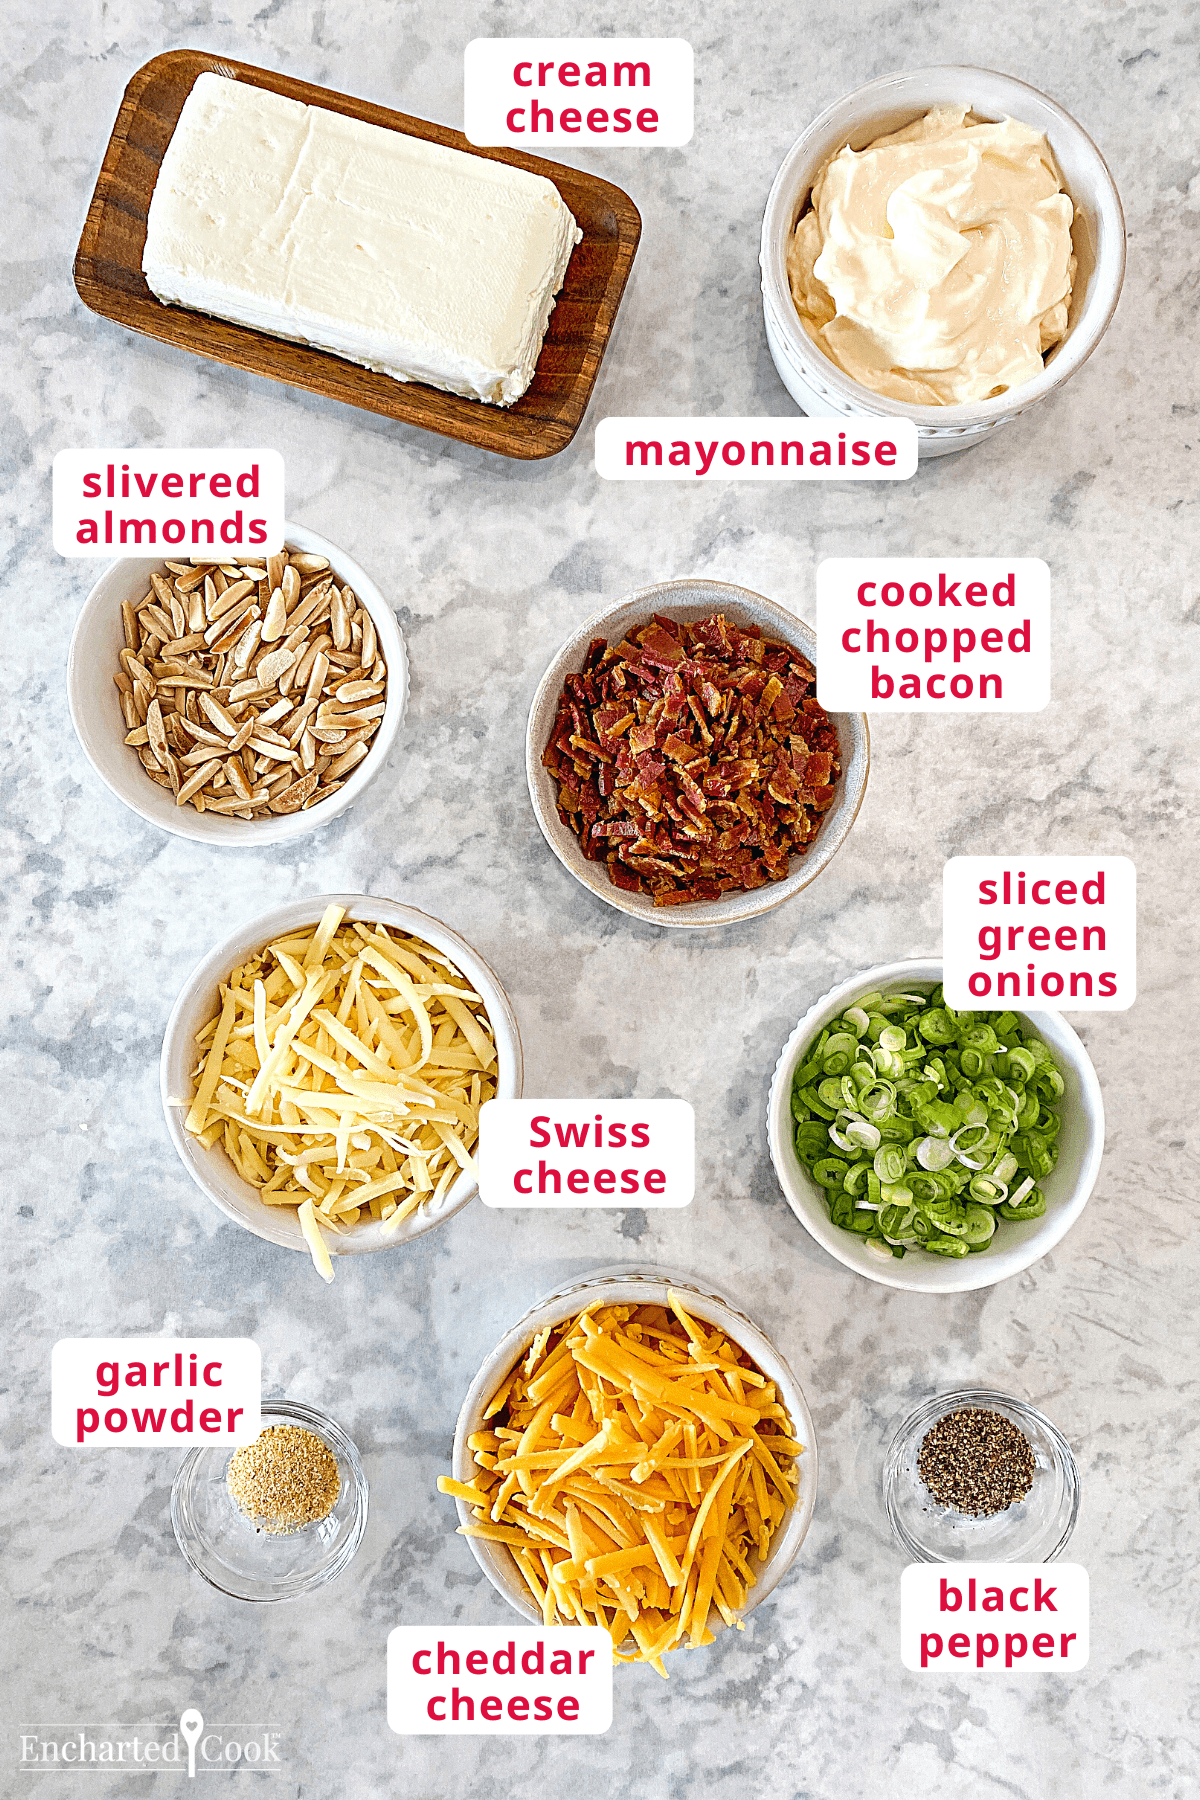 The ingredients, clockwise from top: cream cheese, mayonnaise, cooked chopped bacon, sliced green onions, black pepper, cheddar cheese, garlic powder, Swiss cheese, and slivered almonds.